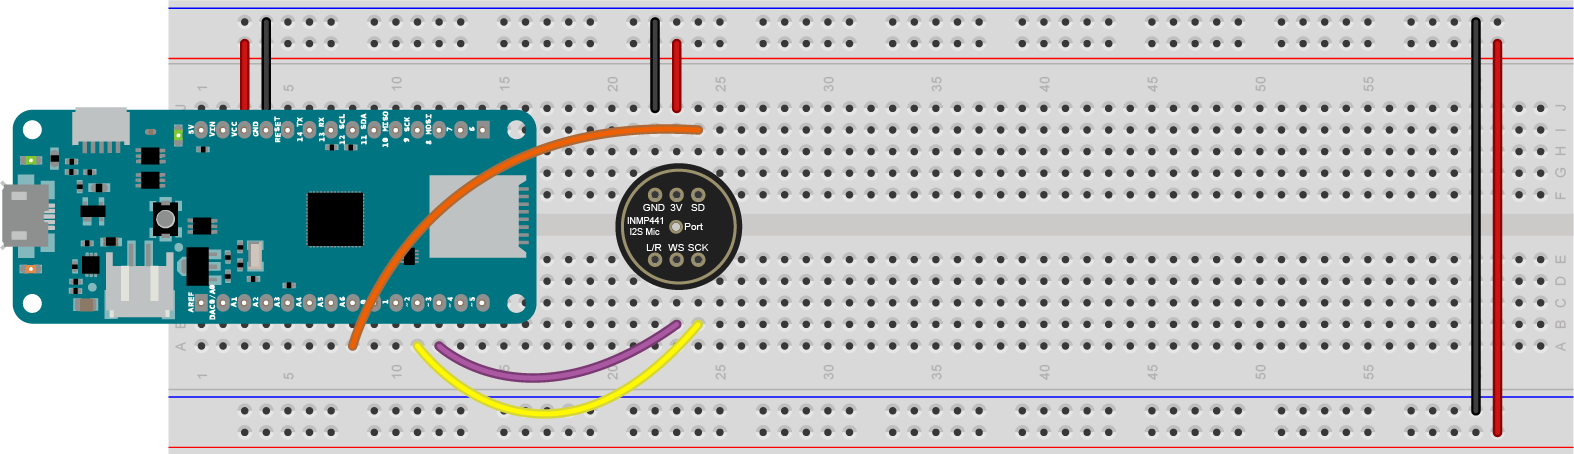 Figure 4. INMP441 I2S Mic connected to a MKR Zero.